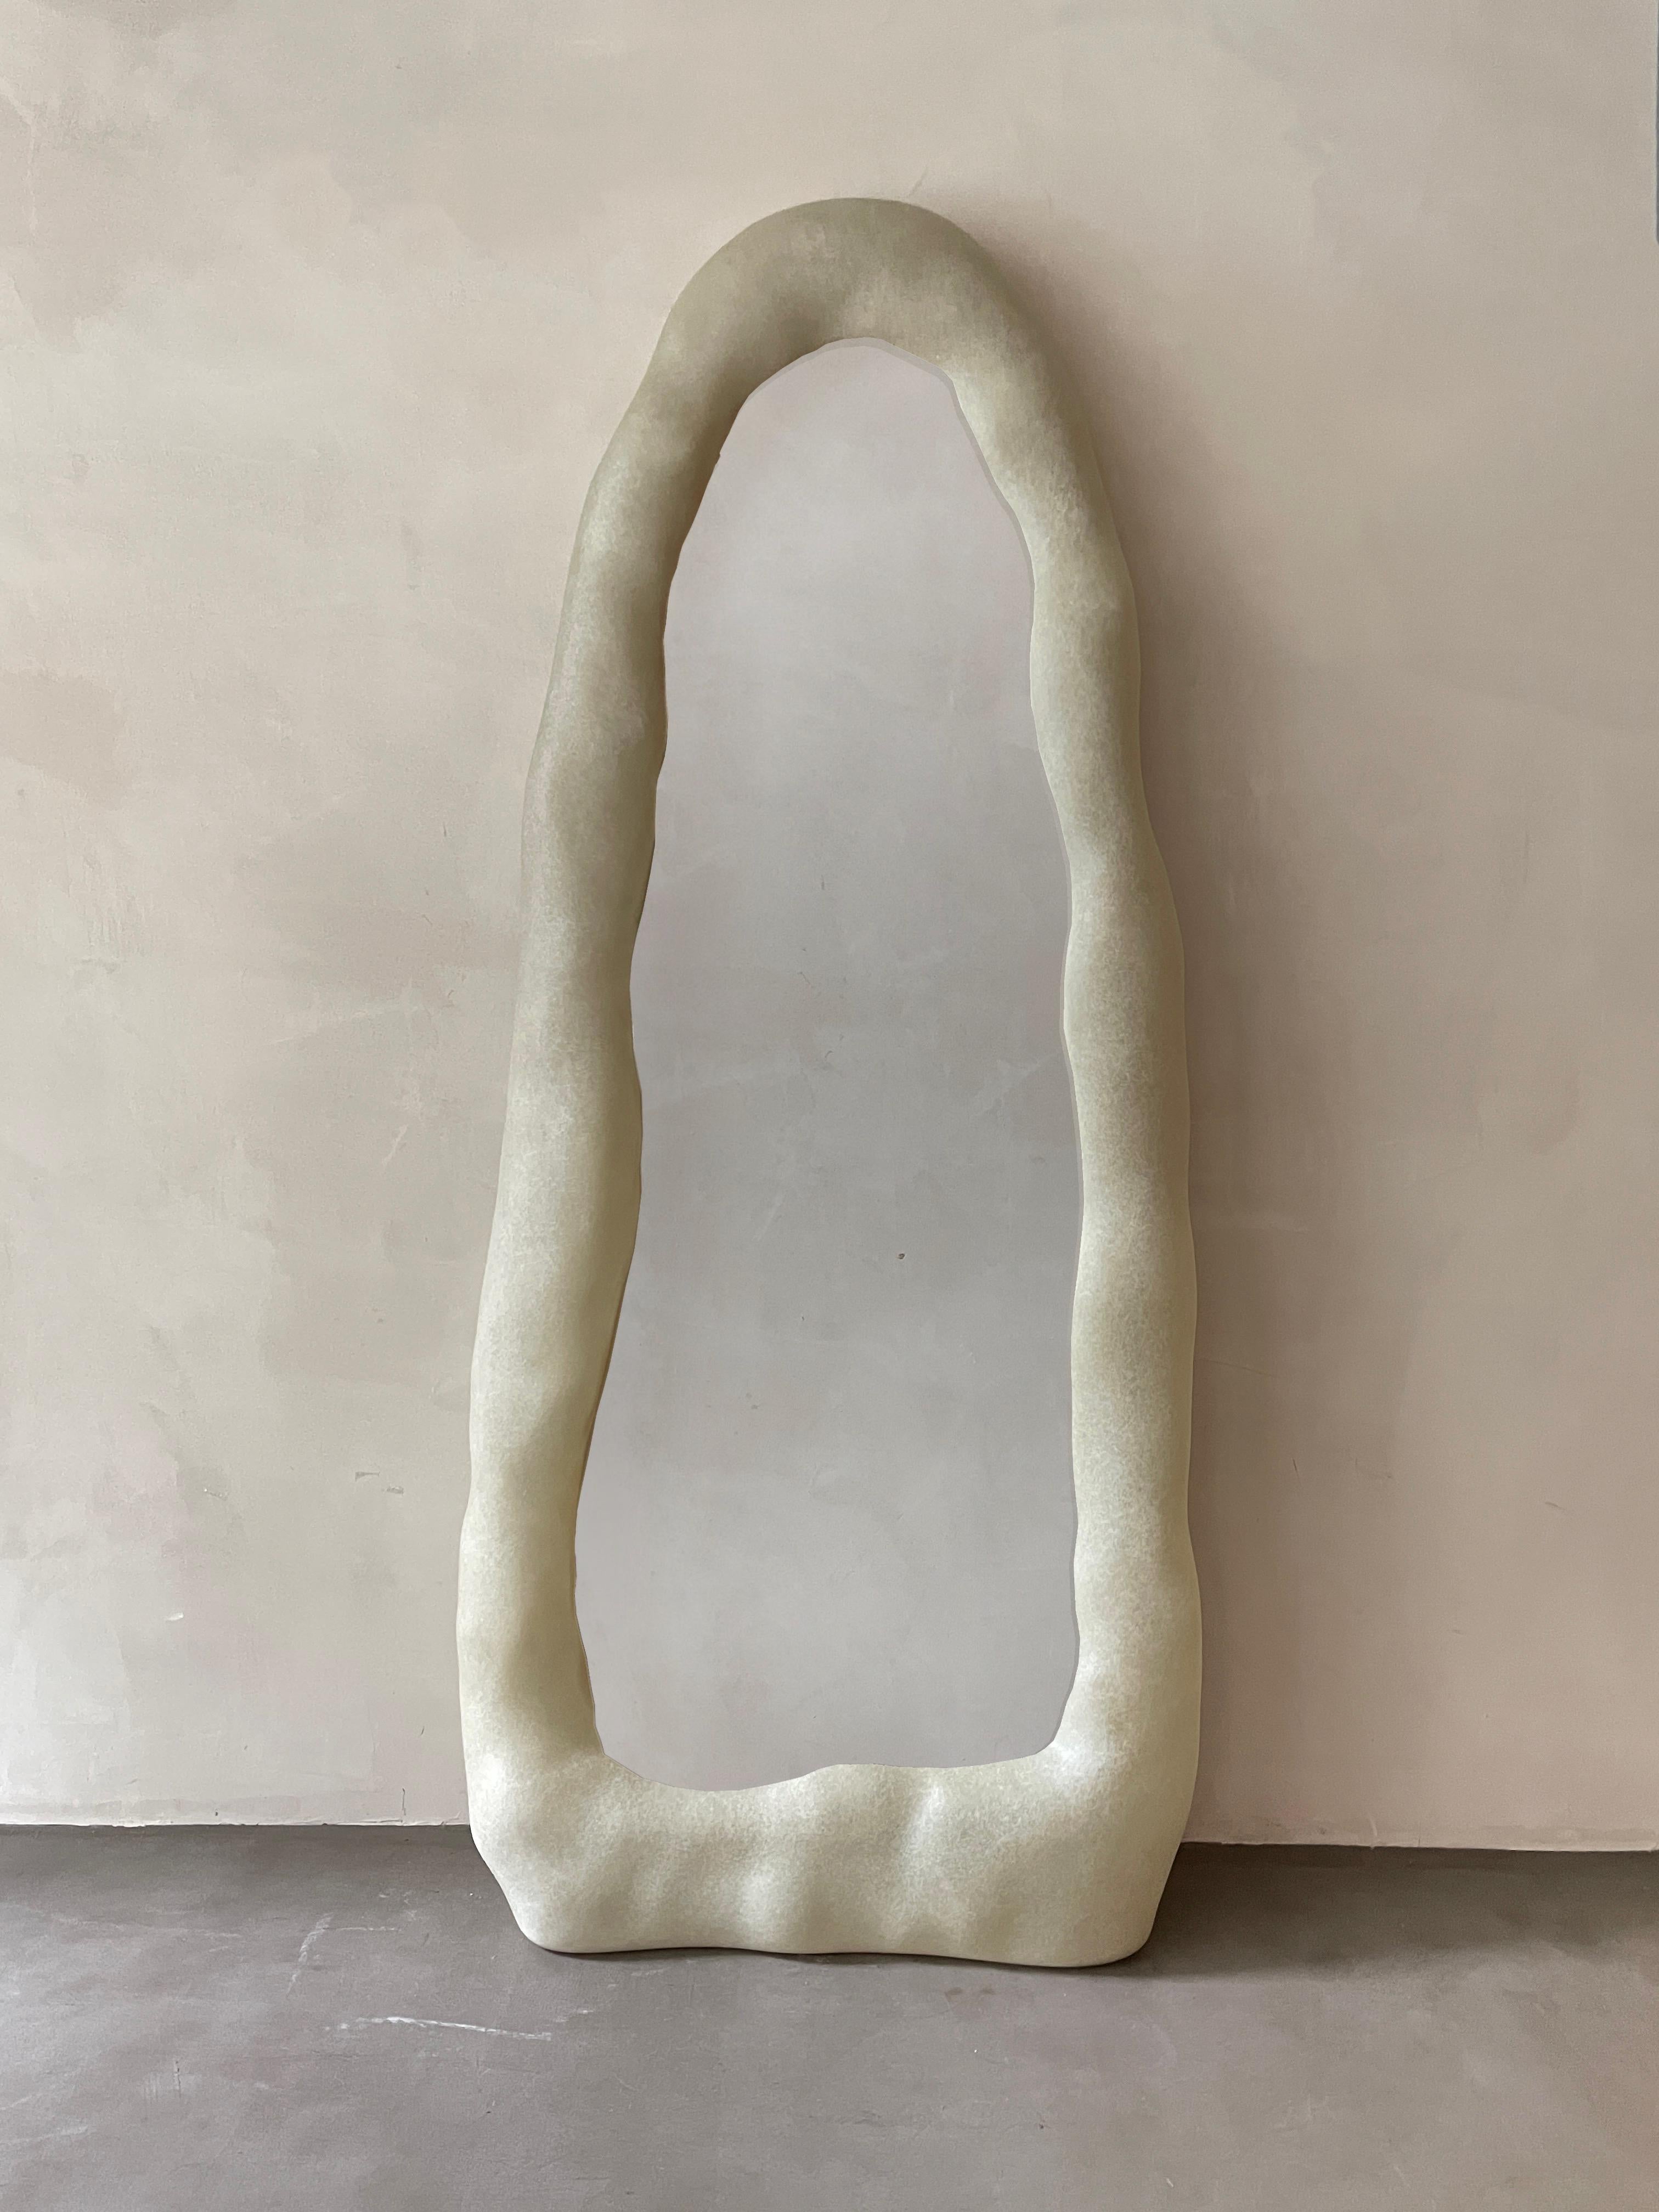 Knead mirror by Karstudio.
Materials: Fiberglass.
Dimensions: W 80 x D 22 x H 193 cm.

Knead mirror preserves the handmade traces of clay-kneading, and the hand-polished
texture captures the aesthetic and emotion of creation. The mirror is narrowed